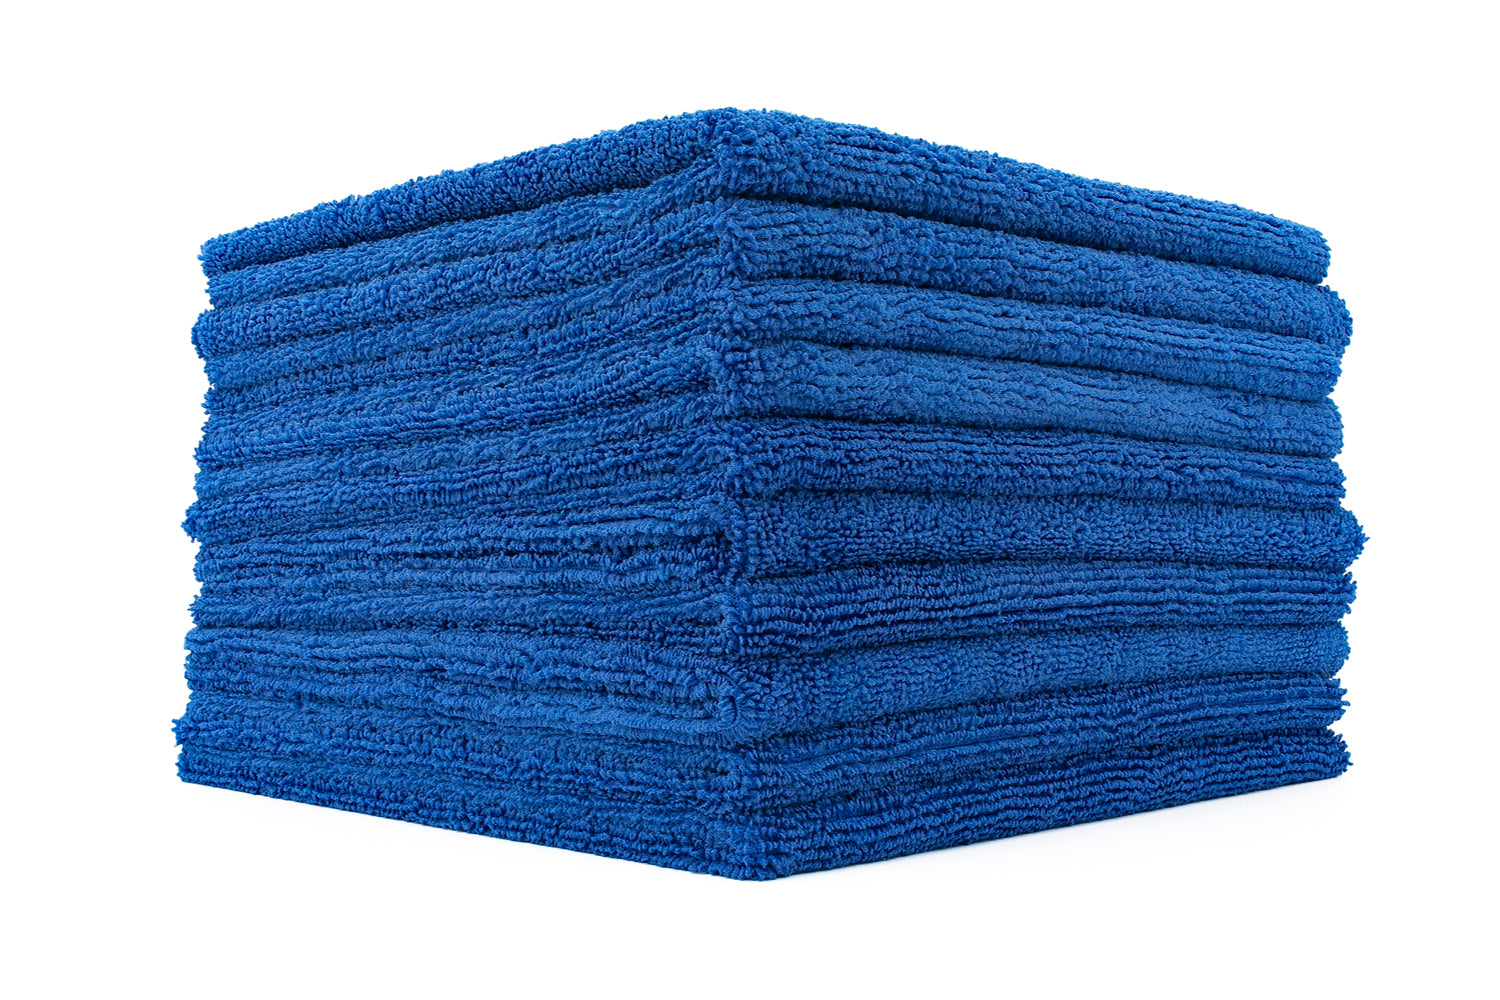 The Rag Company - Edgeless 365 - 16in. x 16in - Royal Blue 10 Pack